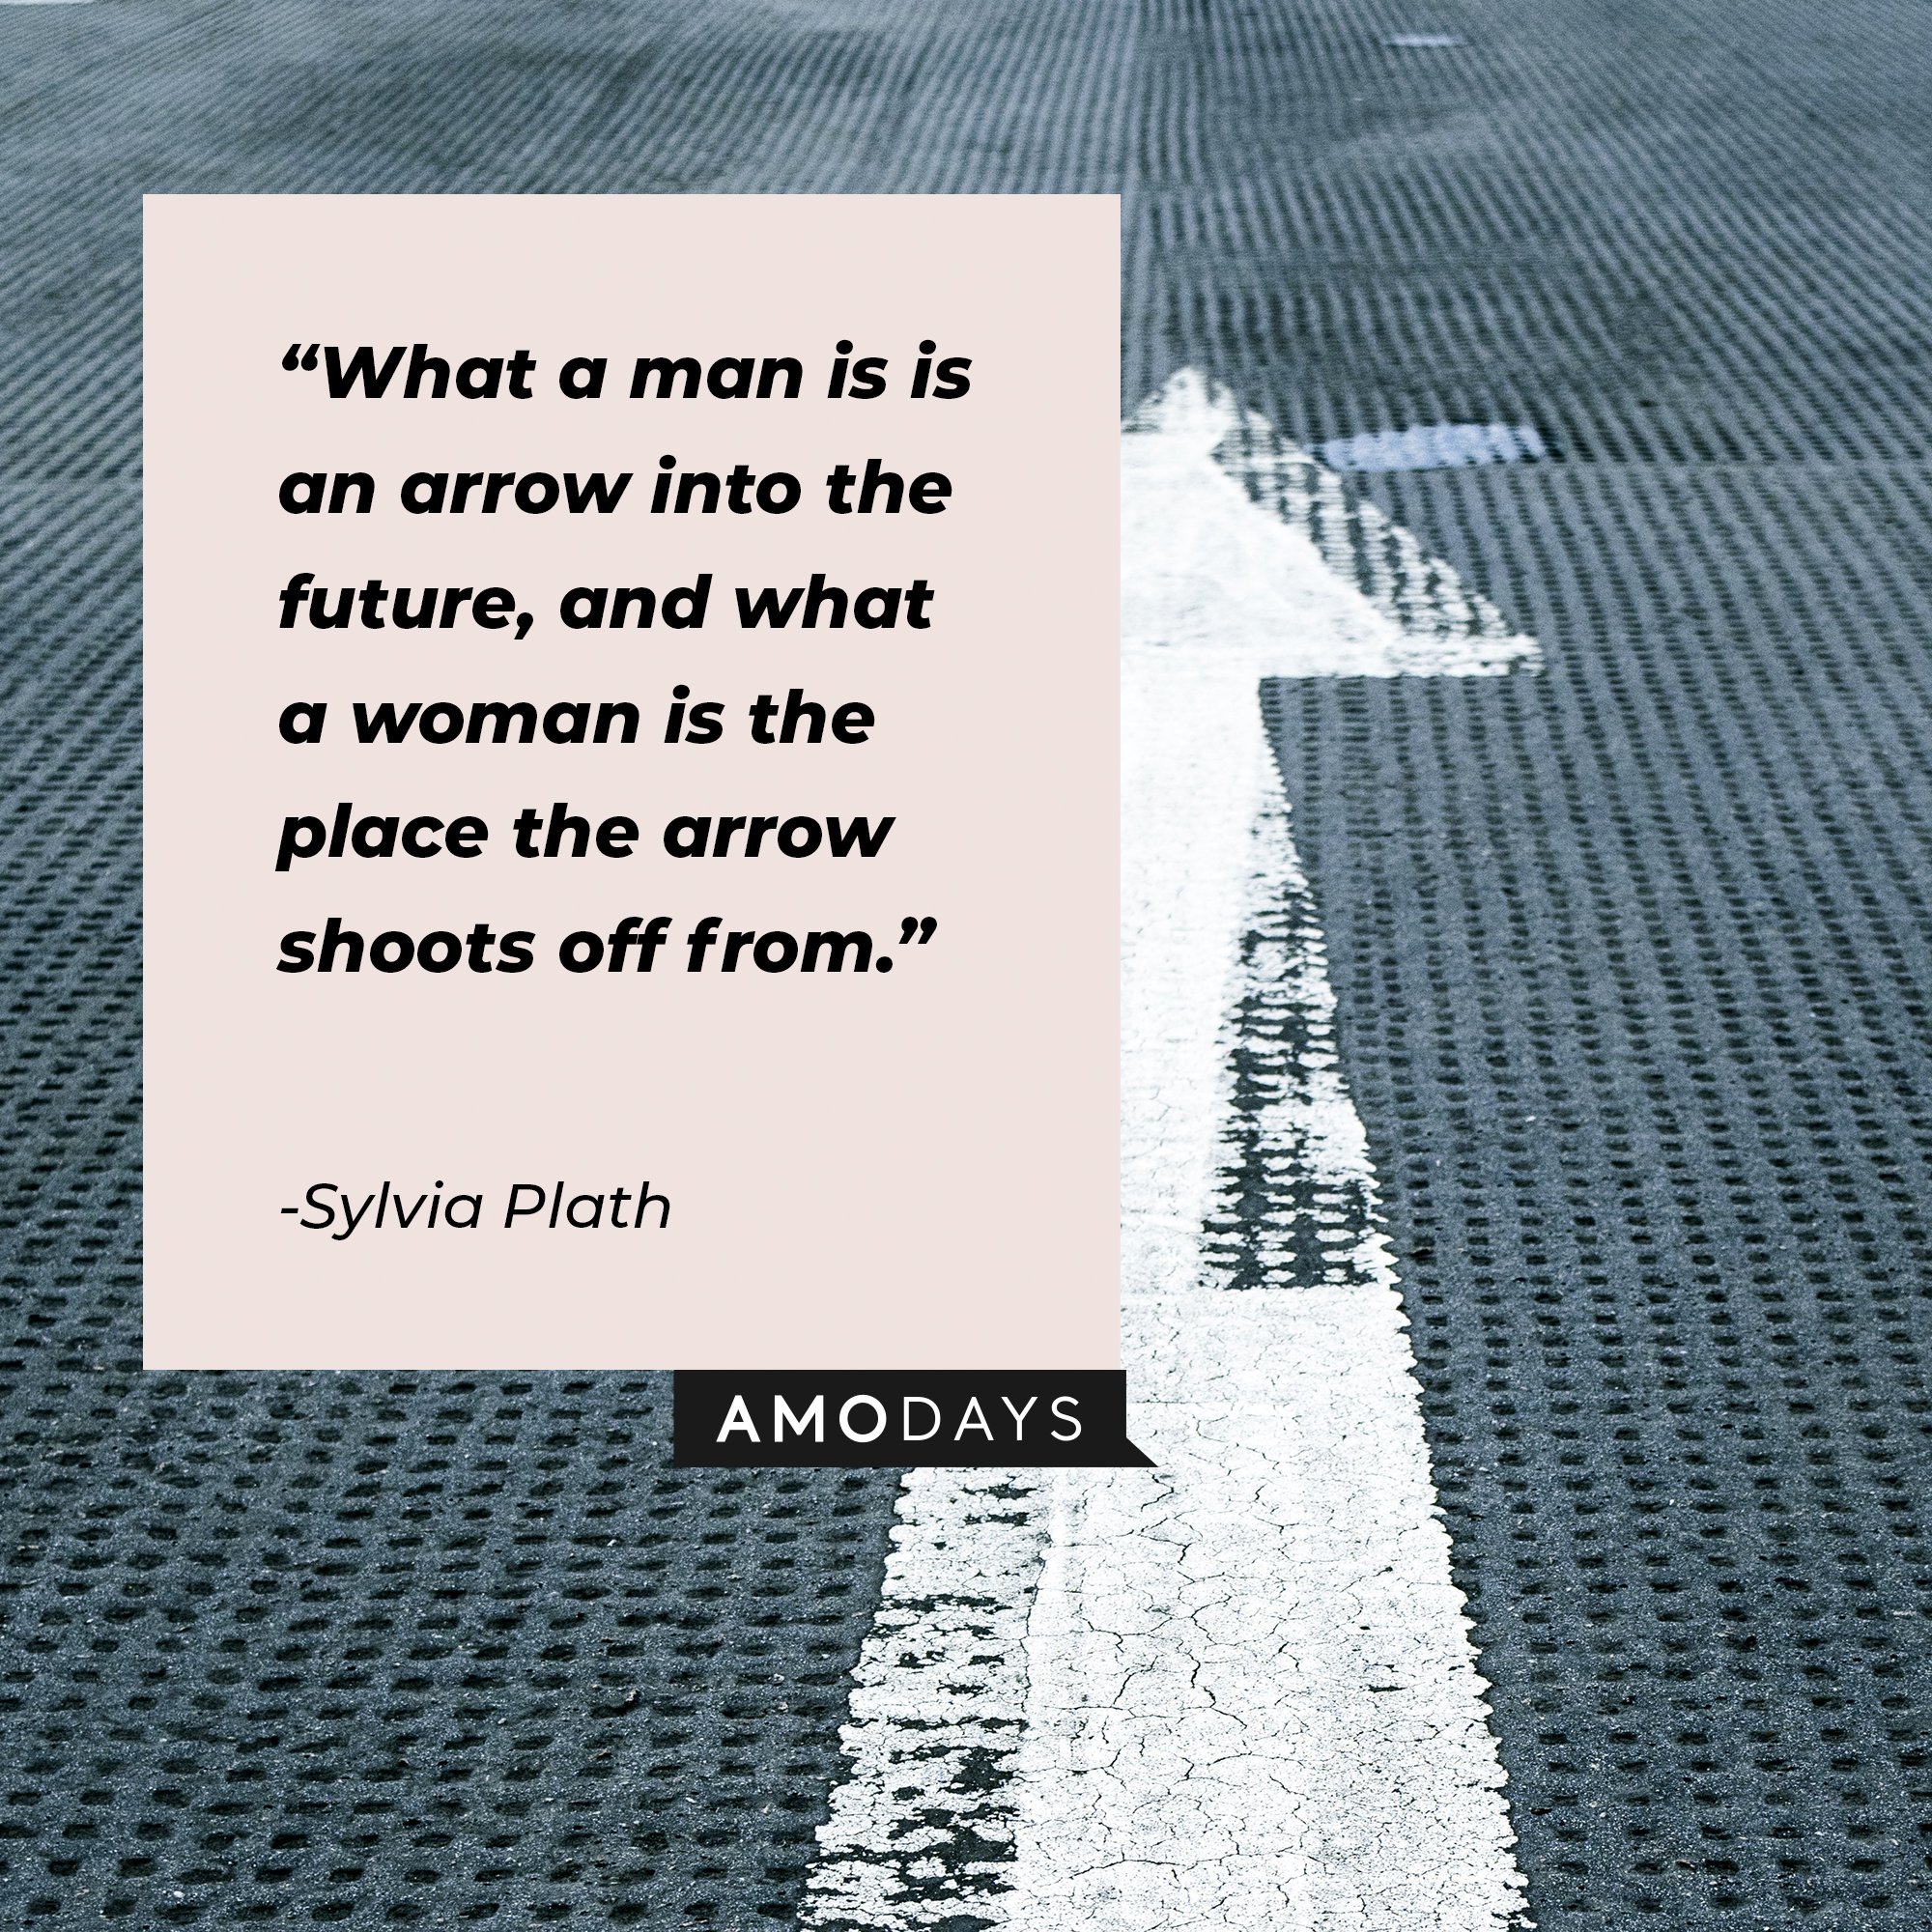 Sylvia Plath’s quote: “What a man is an arrow into the future, and what a woman is the place the arrow shoots off from." | Image: AmoDays